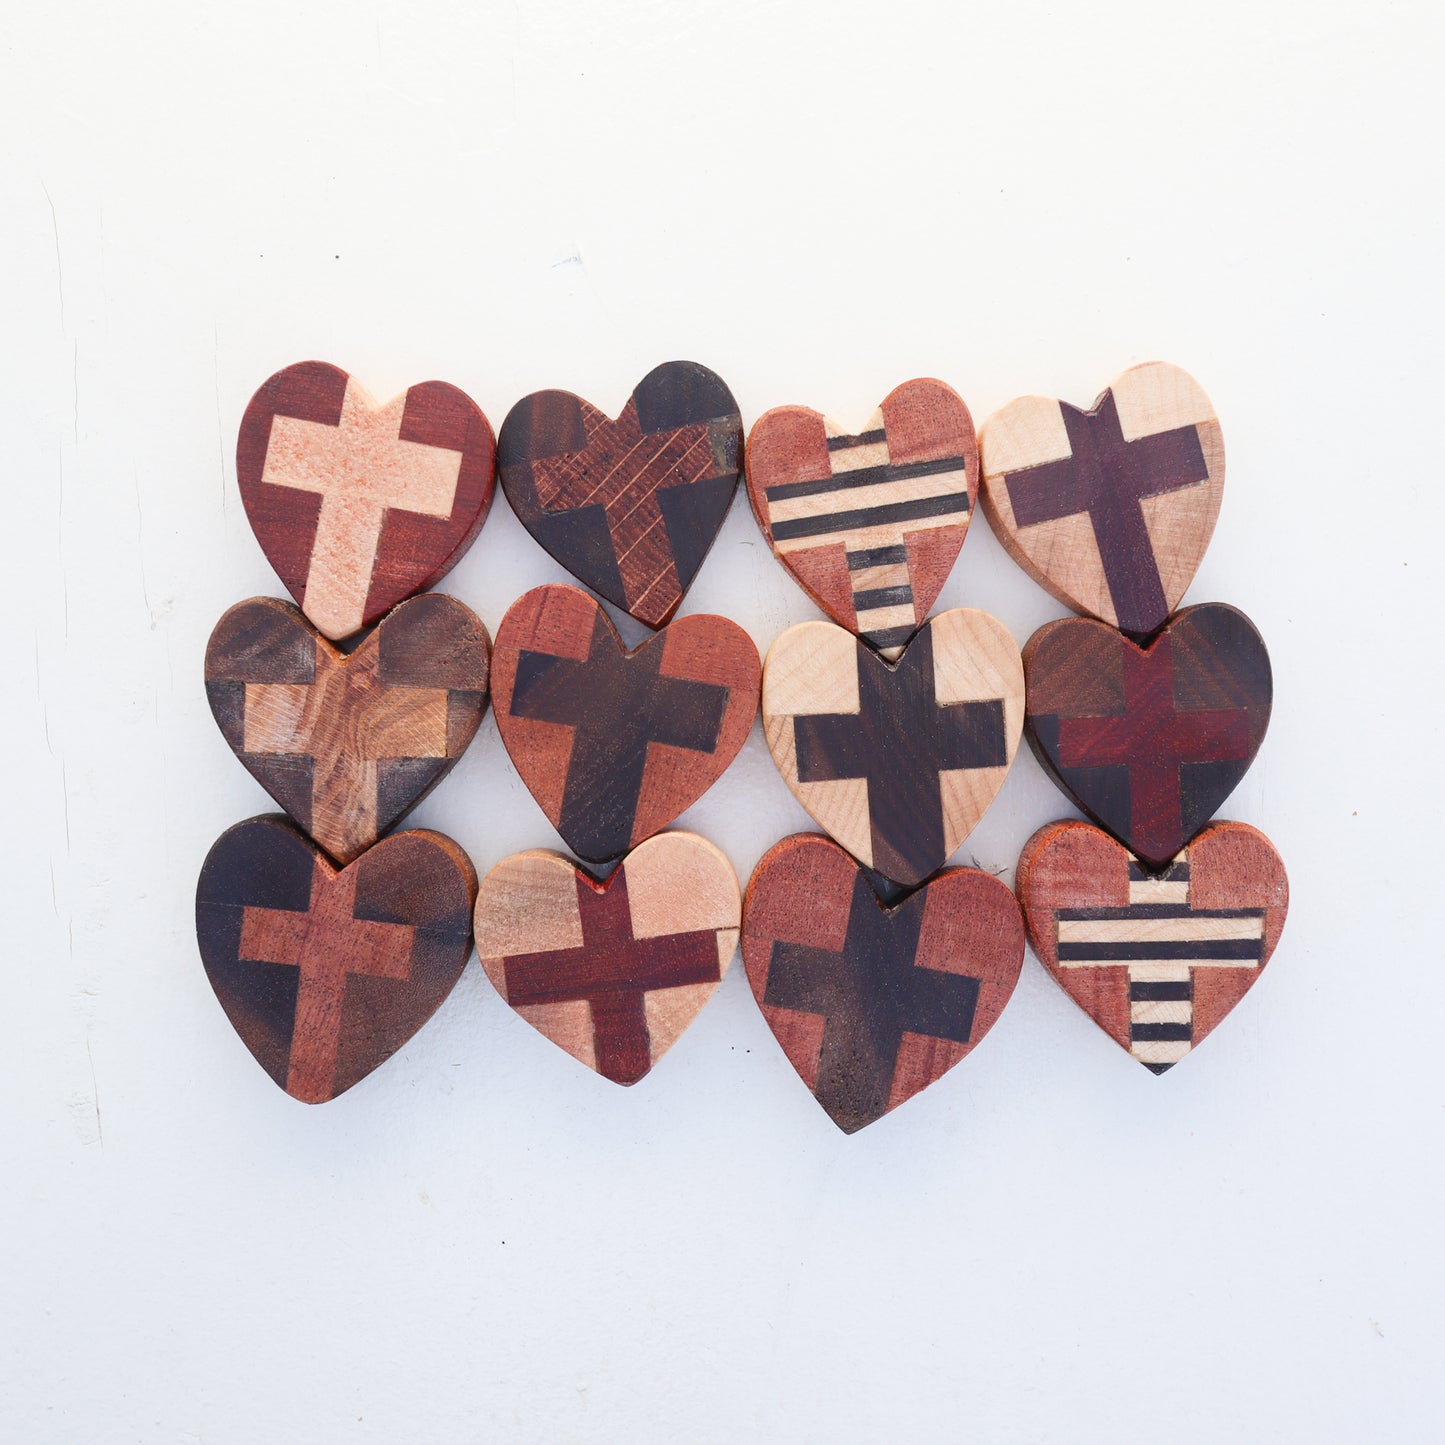 The Cross My Heart Collection